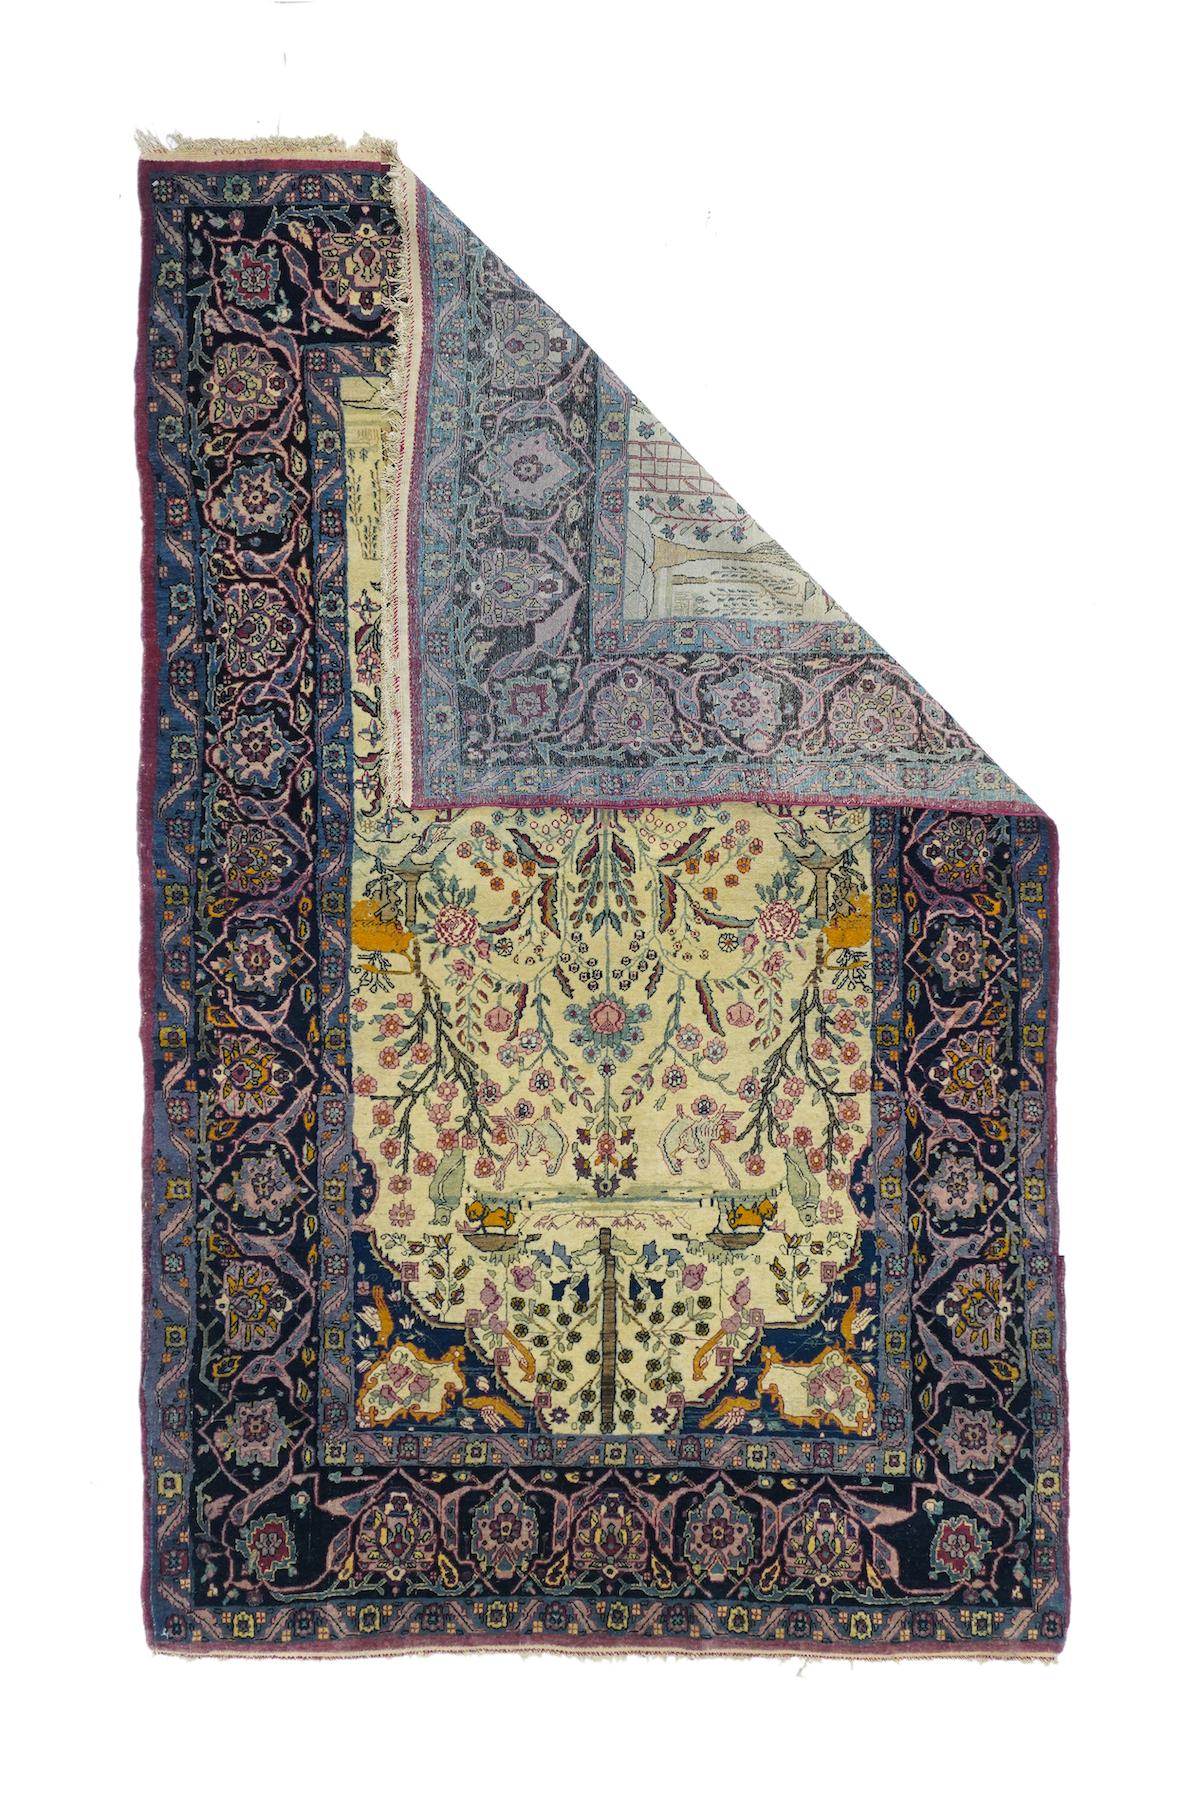 Antique Tehran Rug 4'4'' x 7'. One of a relatively small urban Tehran interwar production, this finely woven niche layout scatter shows a basal central vase erupting in flowers, with lateral trees, rocky outcrops, vineyard frames, animal combats,